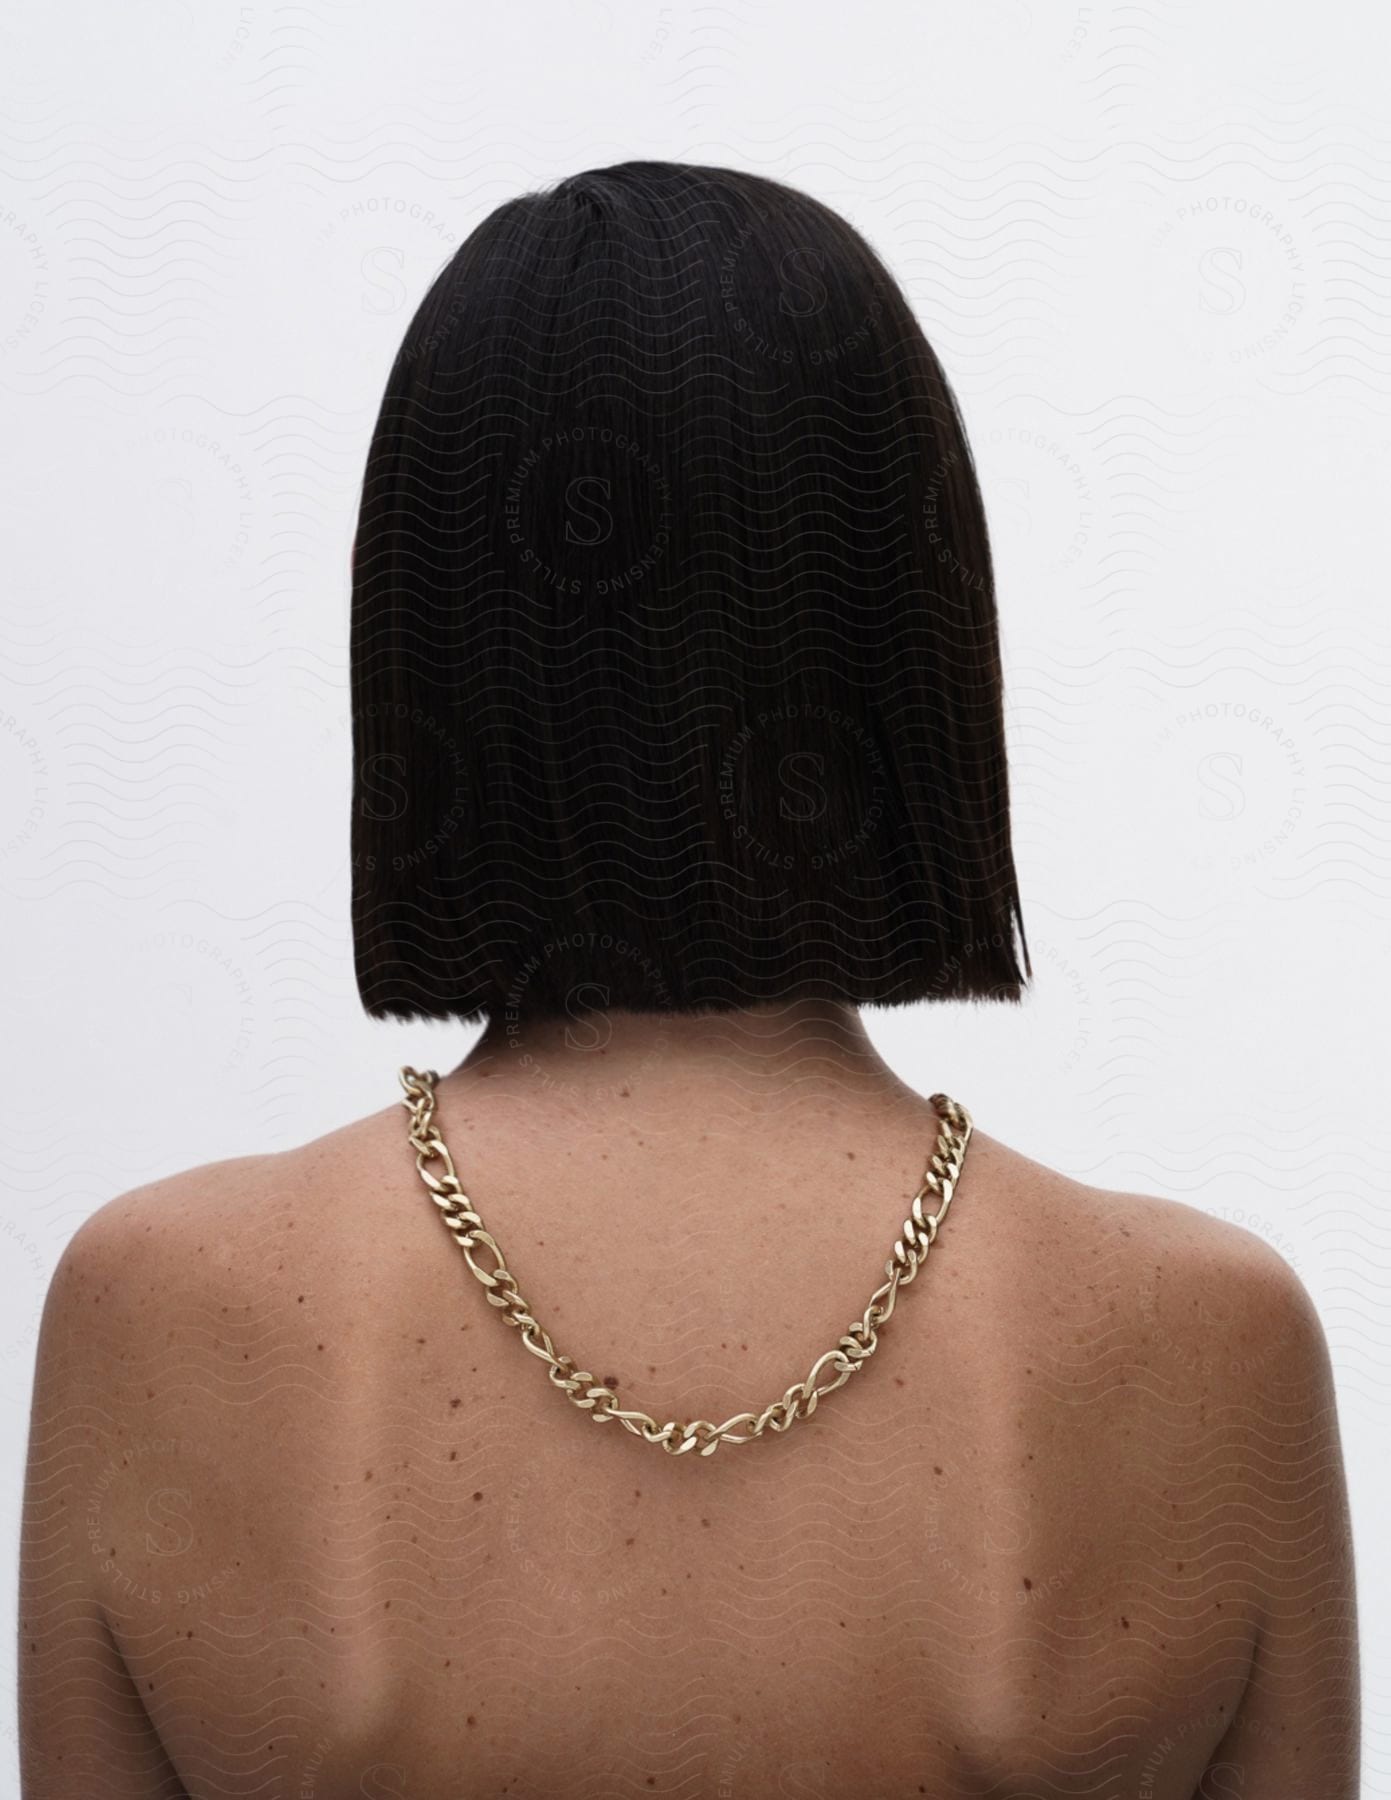 Woman standing with her back turned and black hair cut straight with a gold necklace on her back